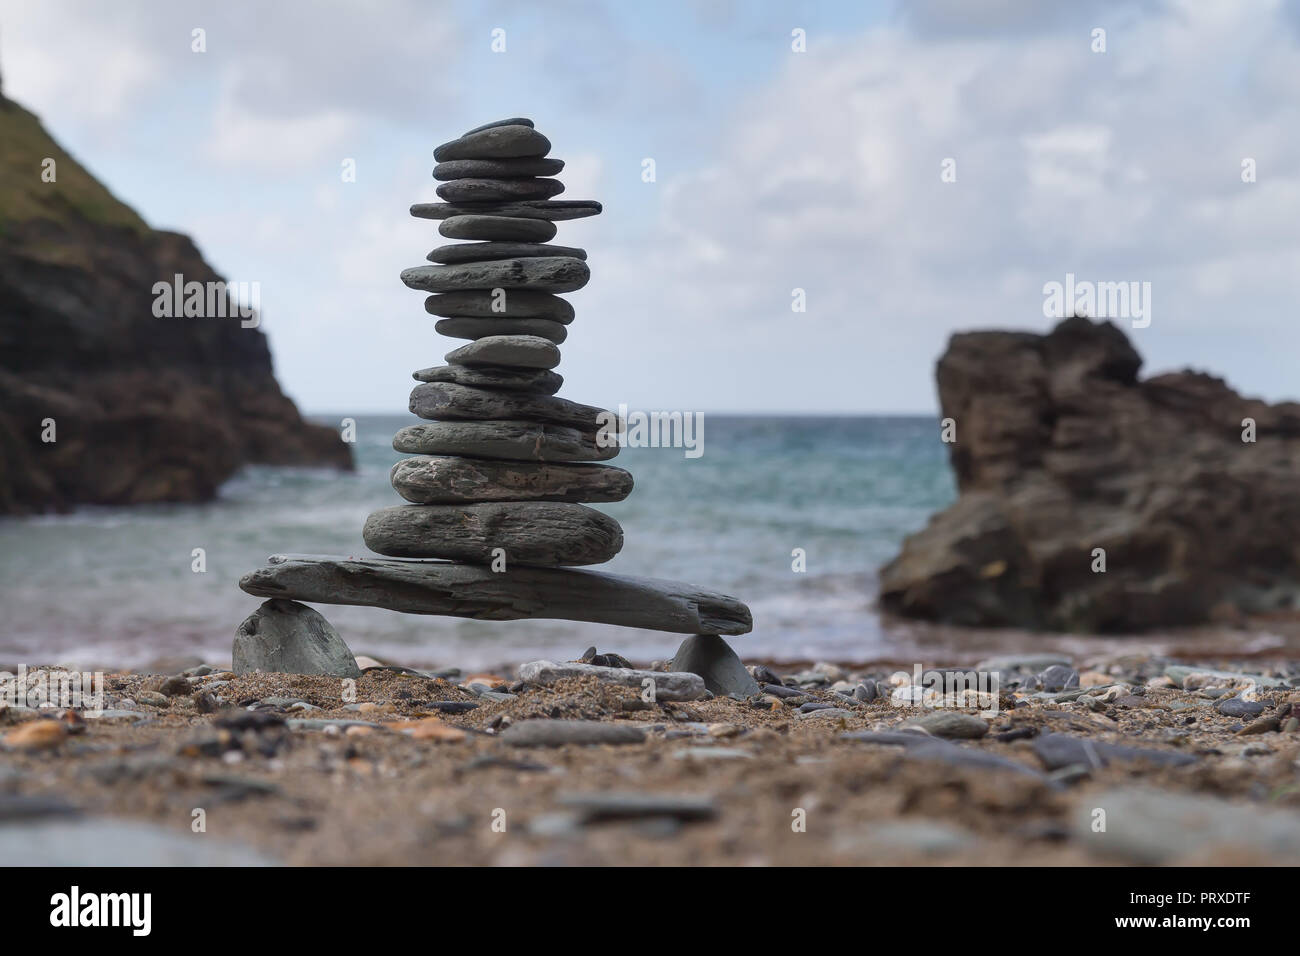 Tower of pebbles on a beach Stock Photo